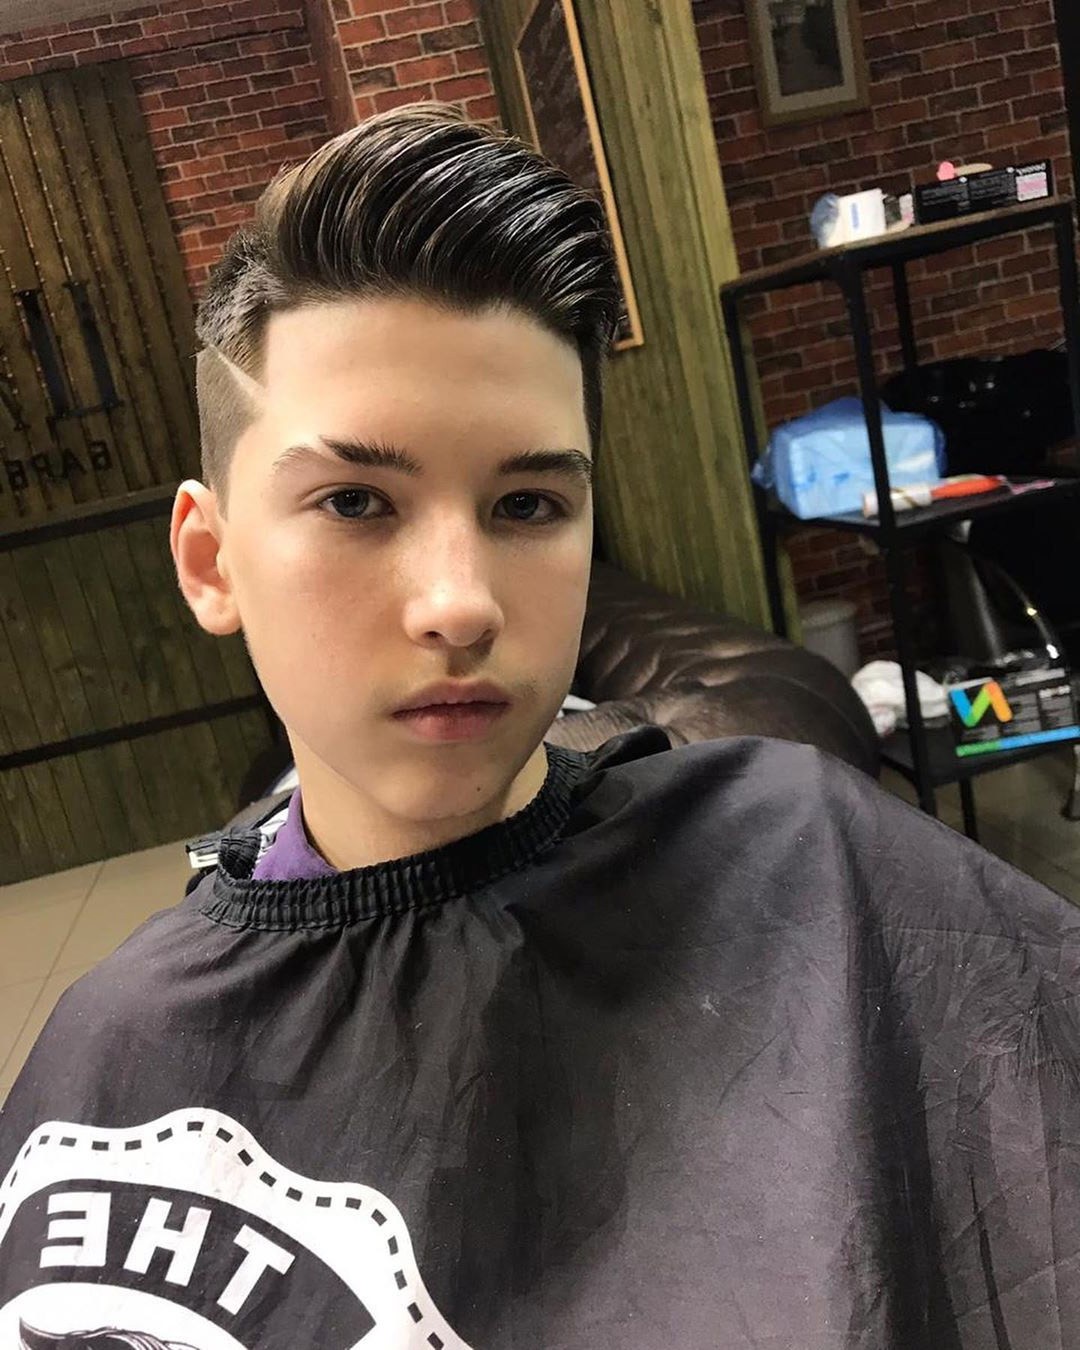 60+ Boys' Undercut Styles: Stand Out from the Crowd!